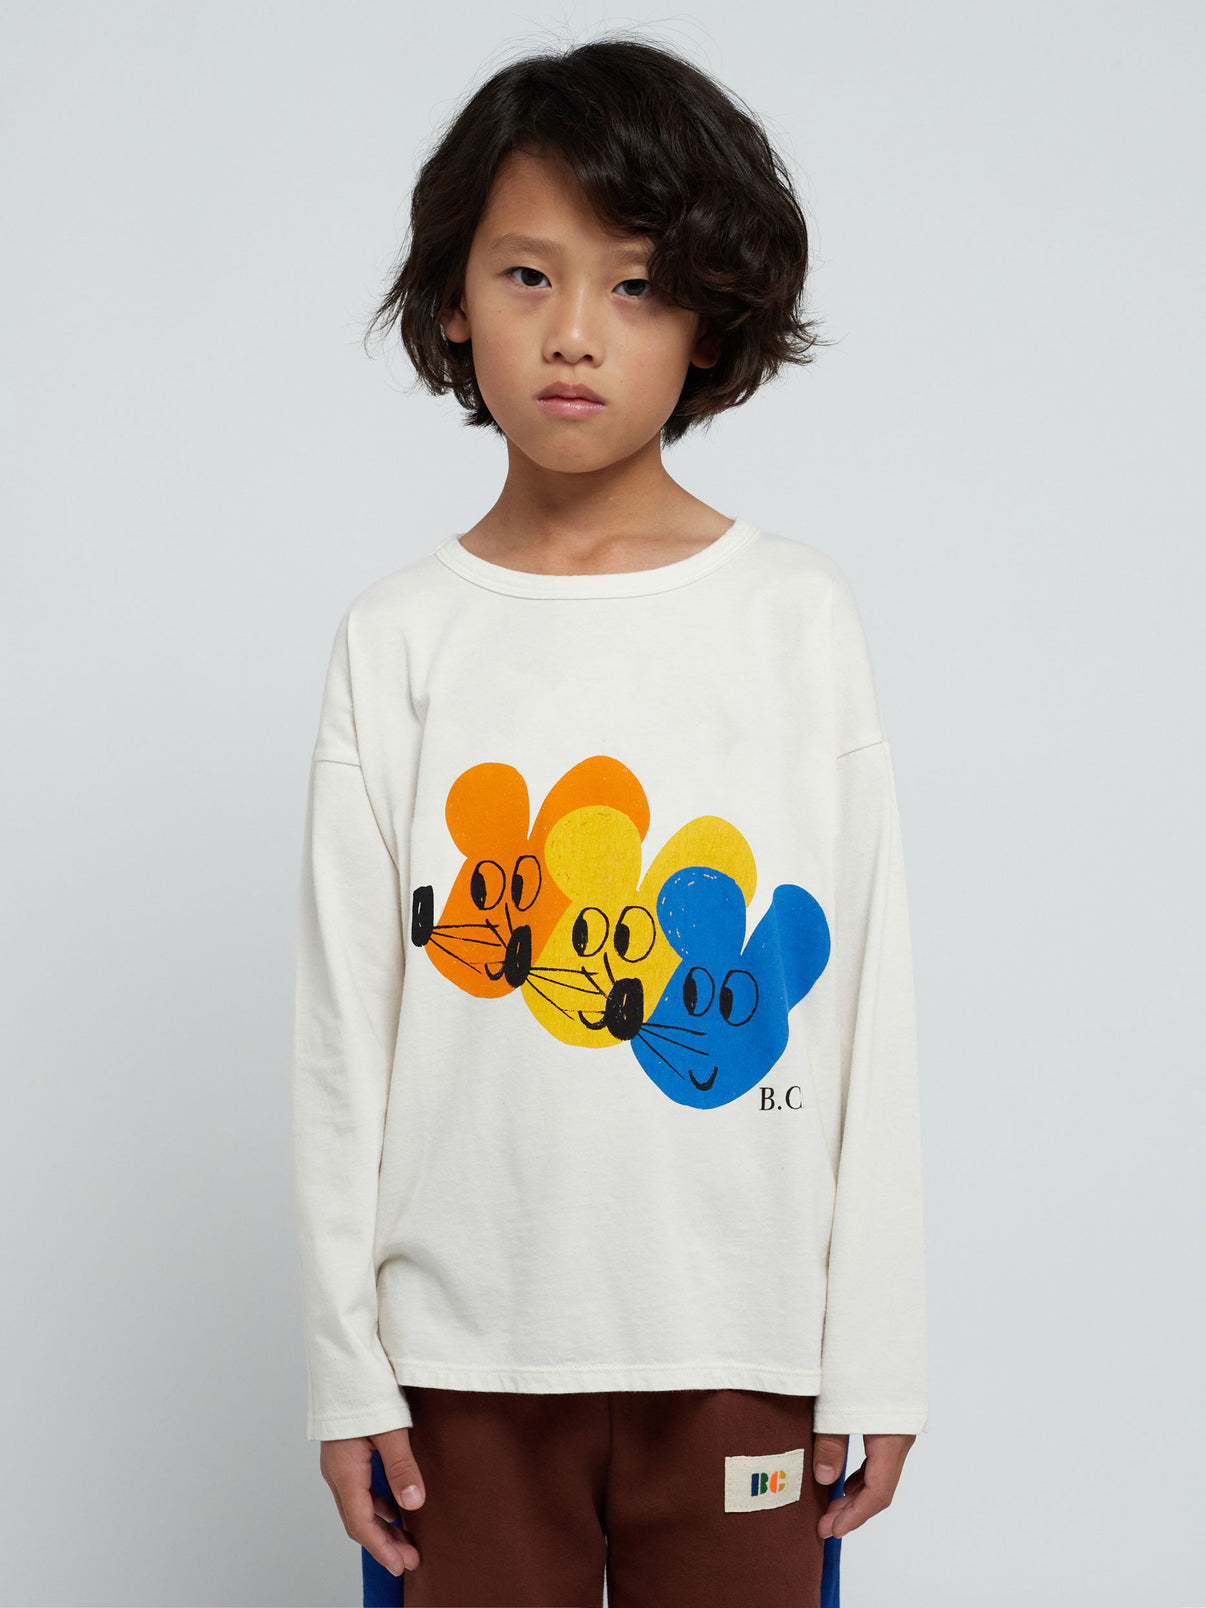 Bobo Choses Multicolor Mouse Tee. 100% organic cotton white long sleeve t-shirt. Designed with long sleeves and round neck. It has a loose fit. Made in Spain.  Made ethically and sustainably by Bobo Choses.